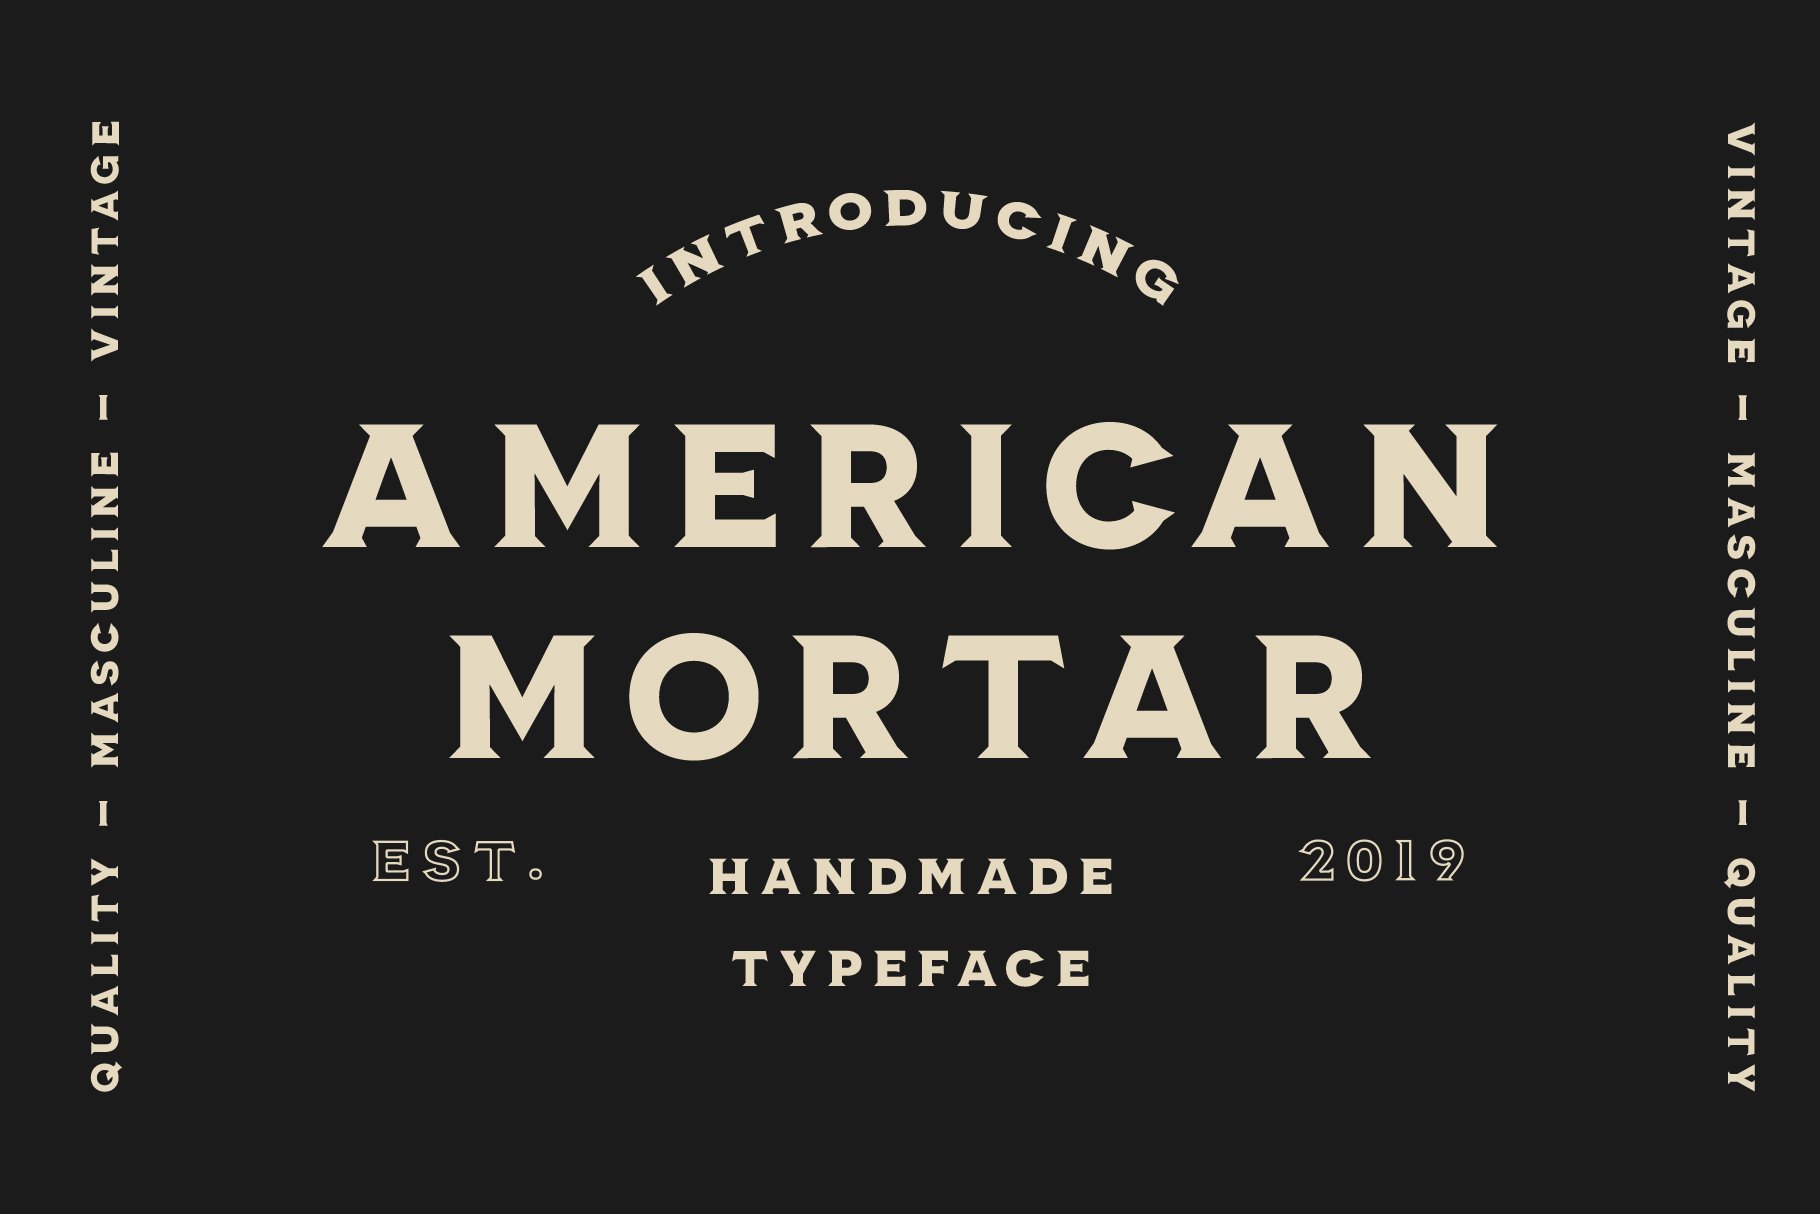 American Mortar -Vintage Font Family cover image.